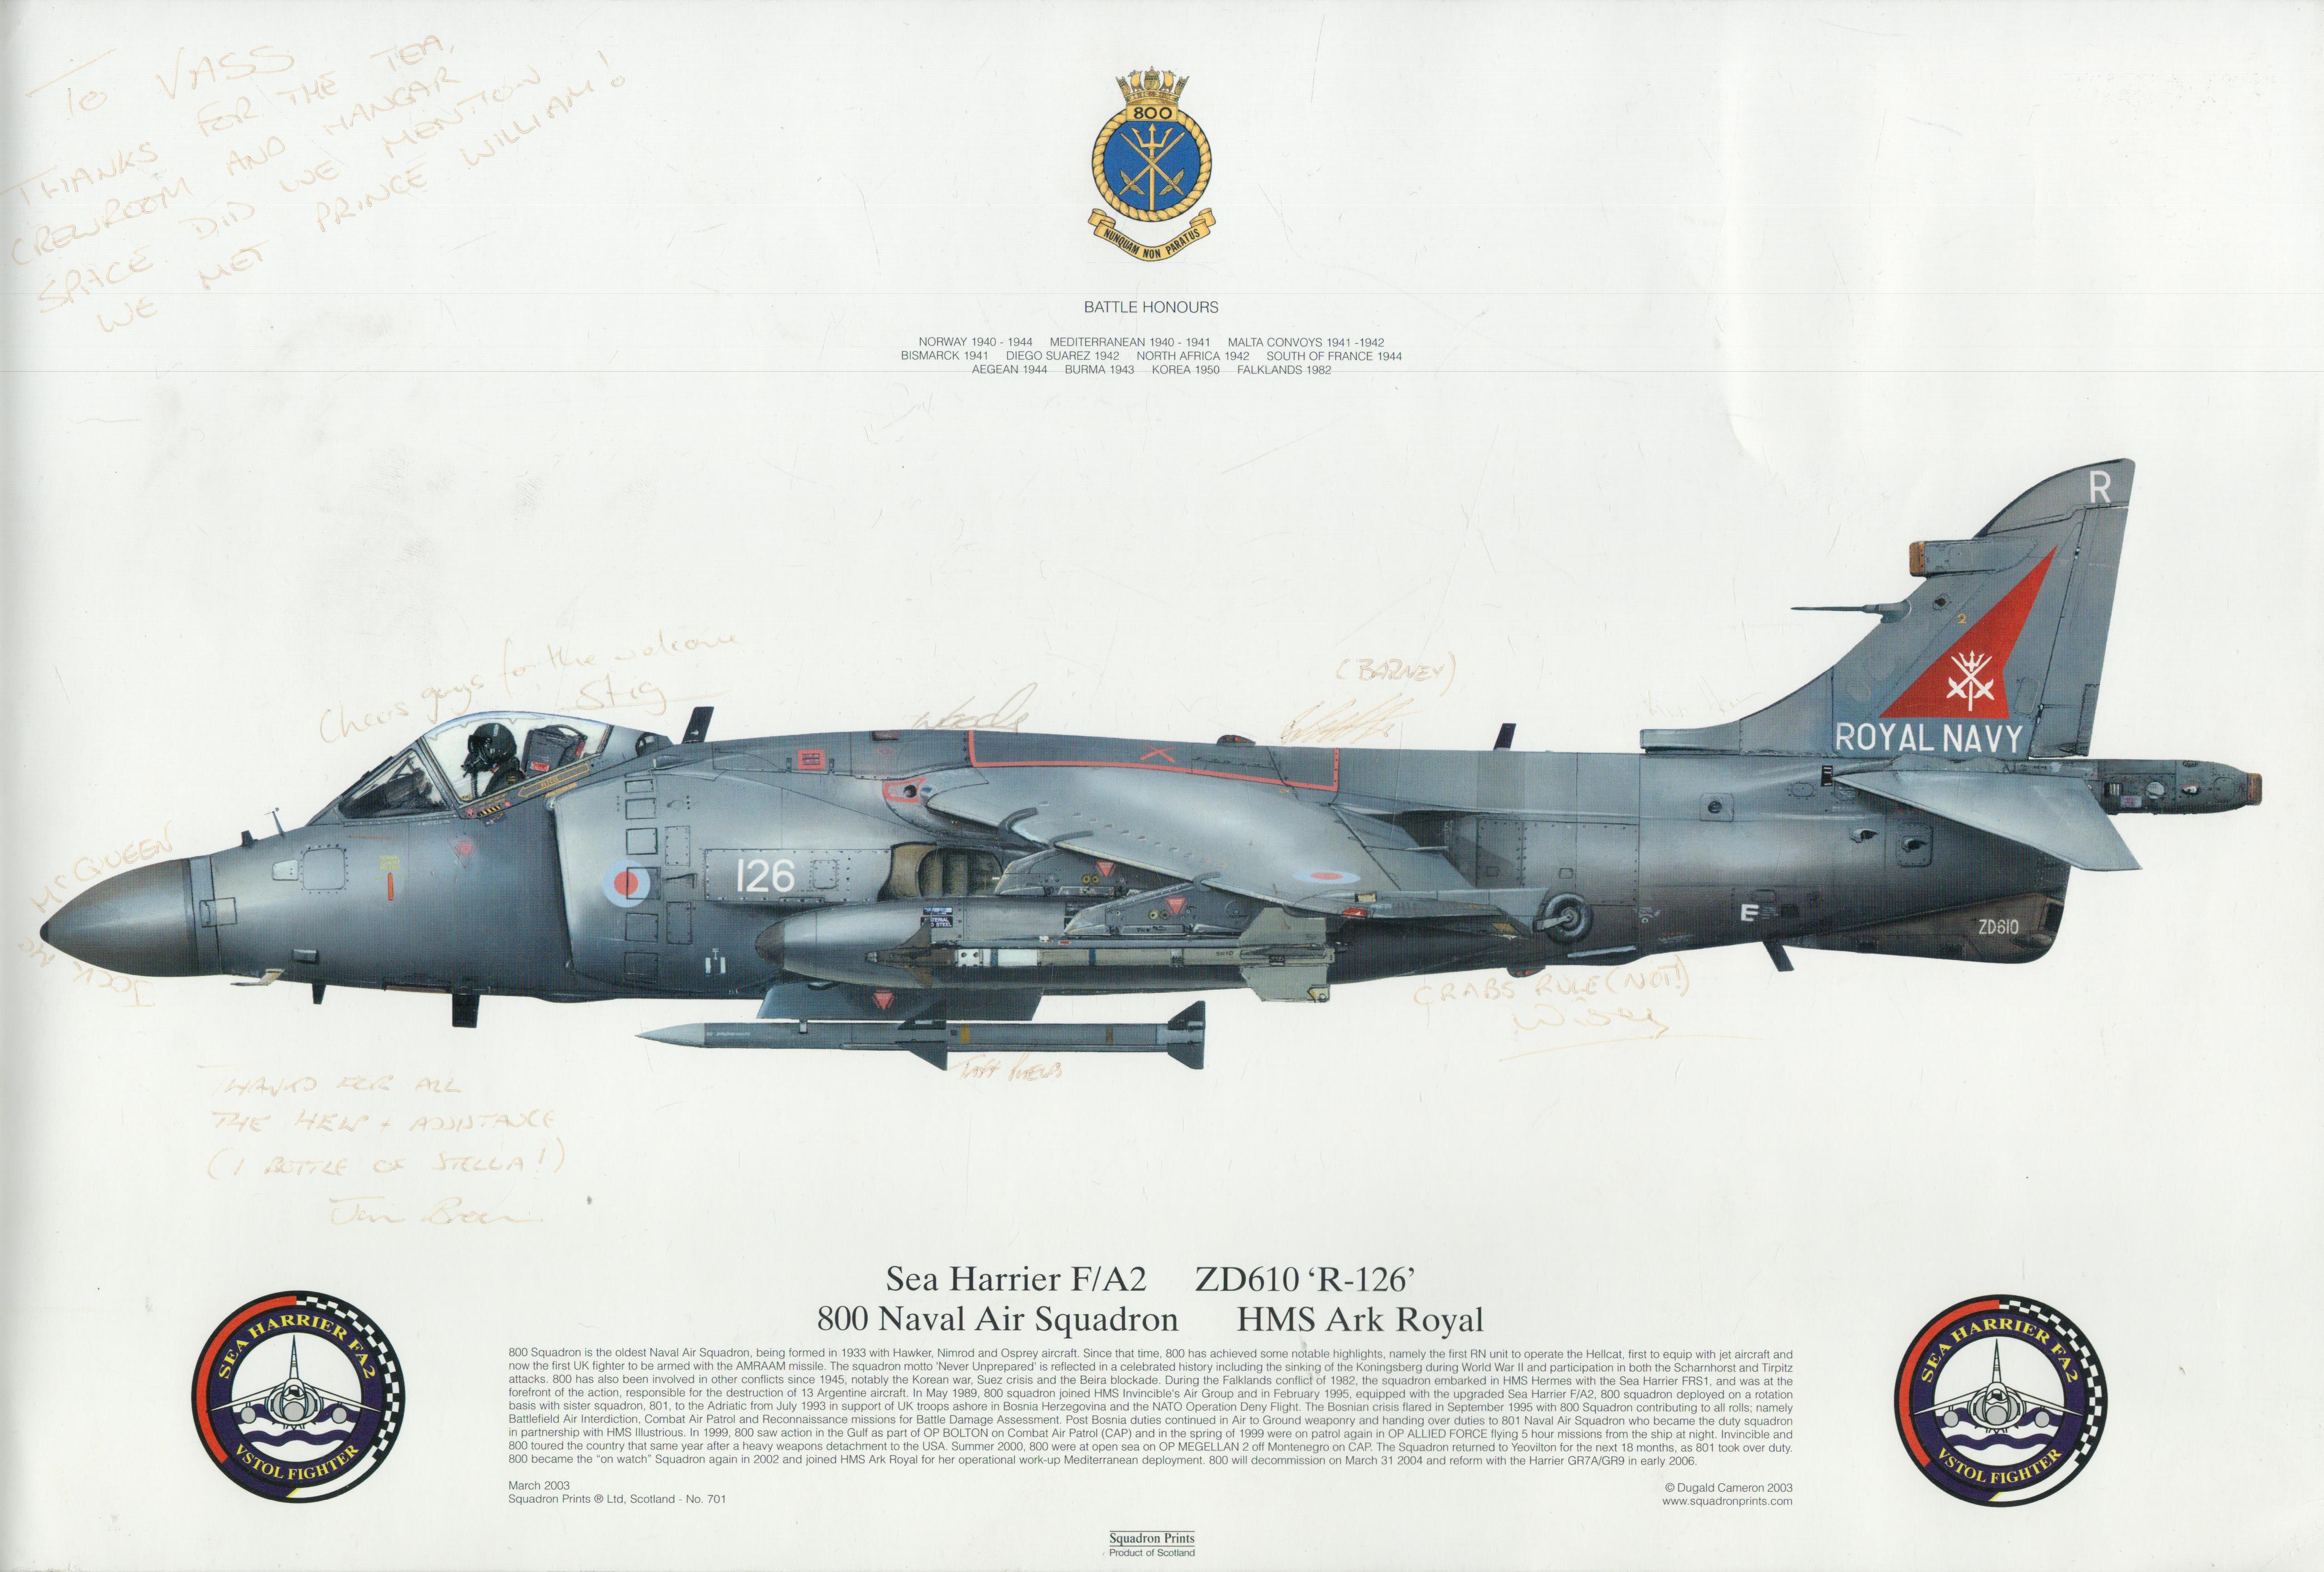 Nine Sea Harrier flight and ground crew signed 16 x 12 inch 800 Naval Air Sqn Squadron print.